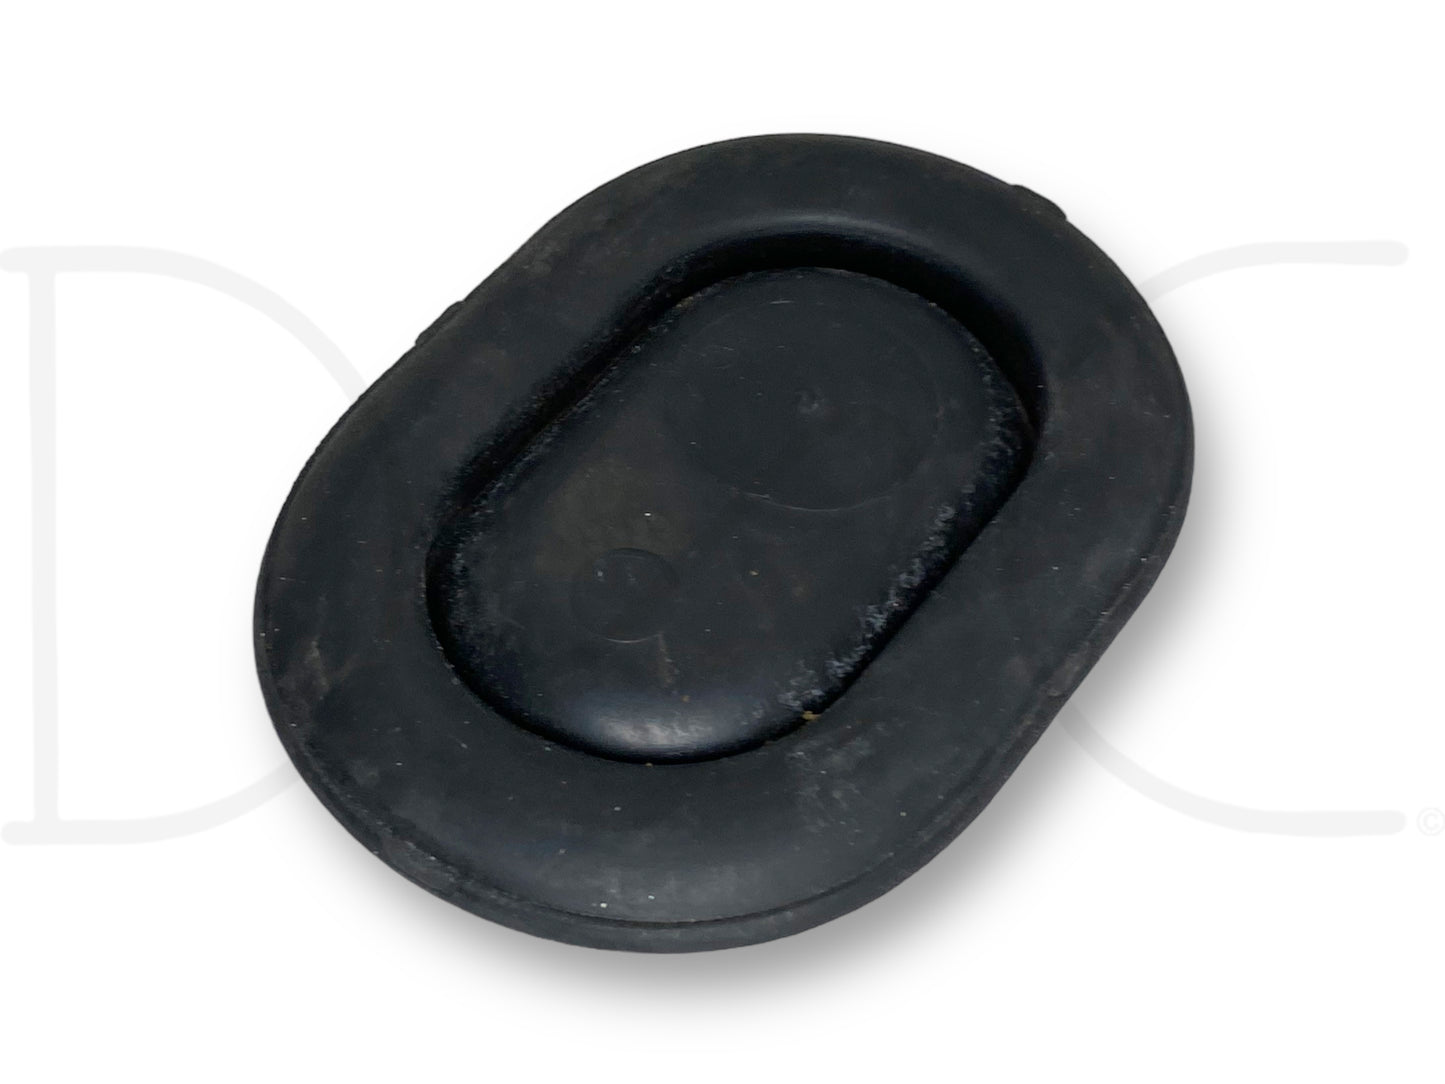 92-96 Ford F150 F250 F350 Cab Mount Bolt Cover Rubber GroMMet E97B-10111A74-Aa